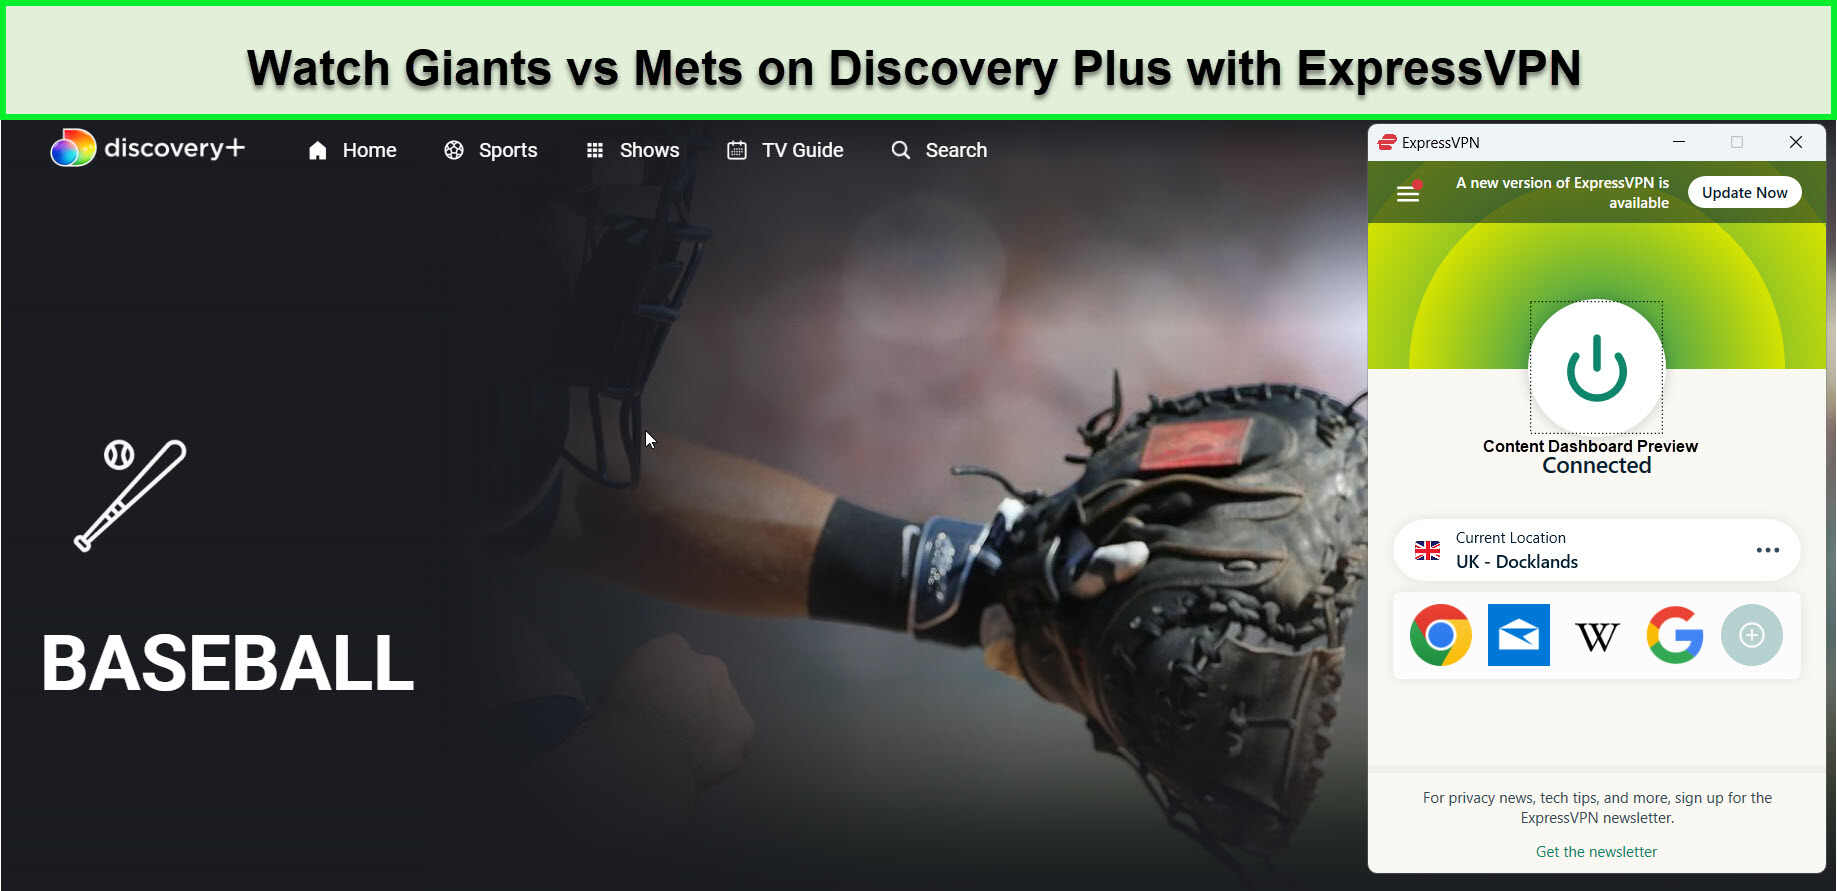 Watch-Giants-vs-Mets-outside-UK-on-Discovery-Plus-with-ExpressVPN